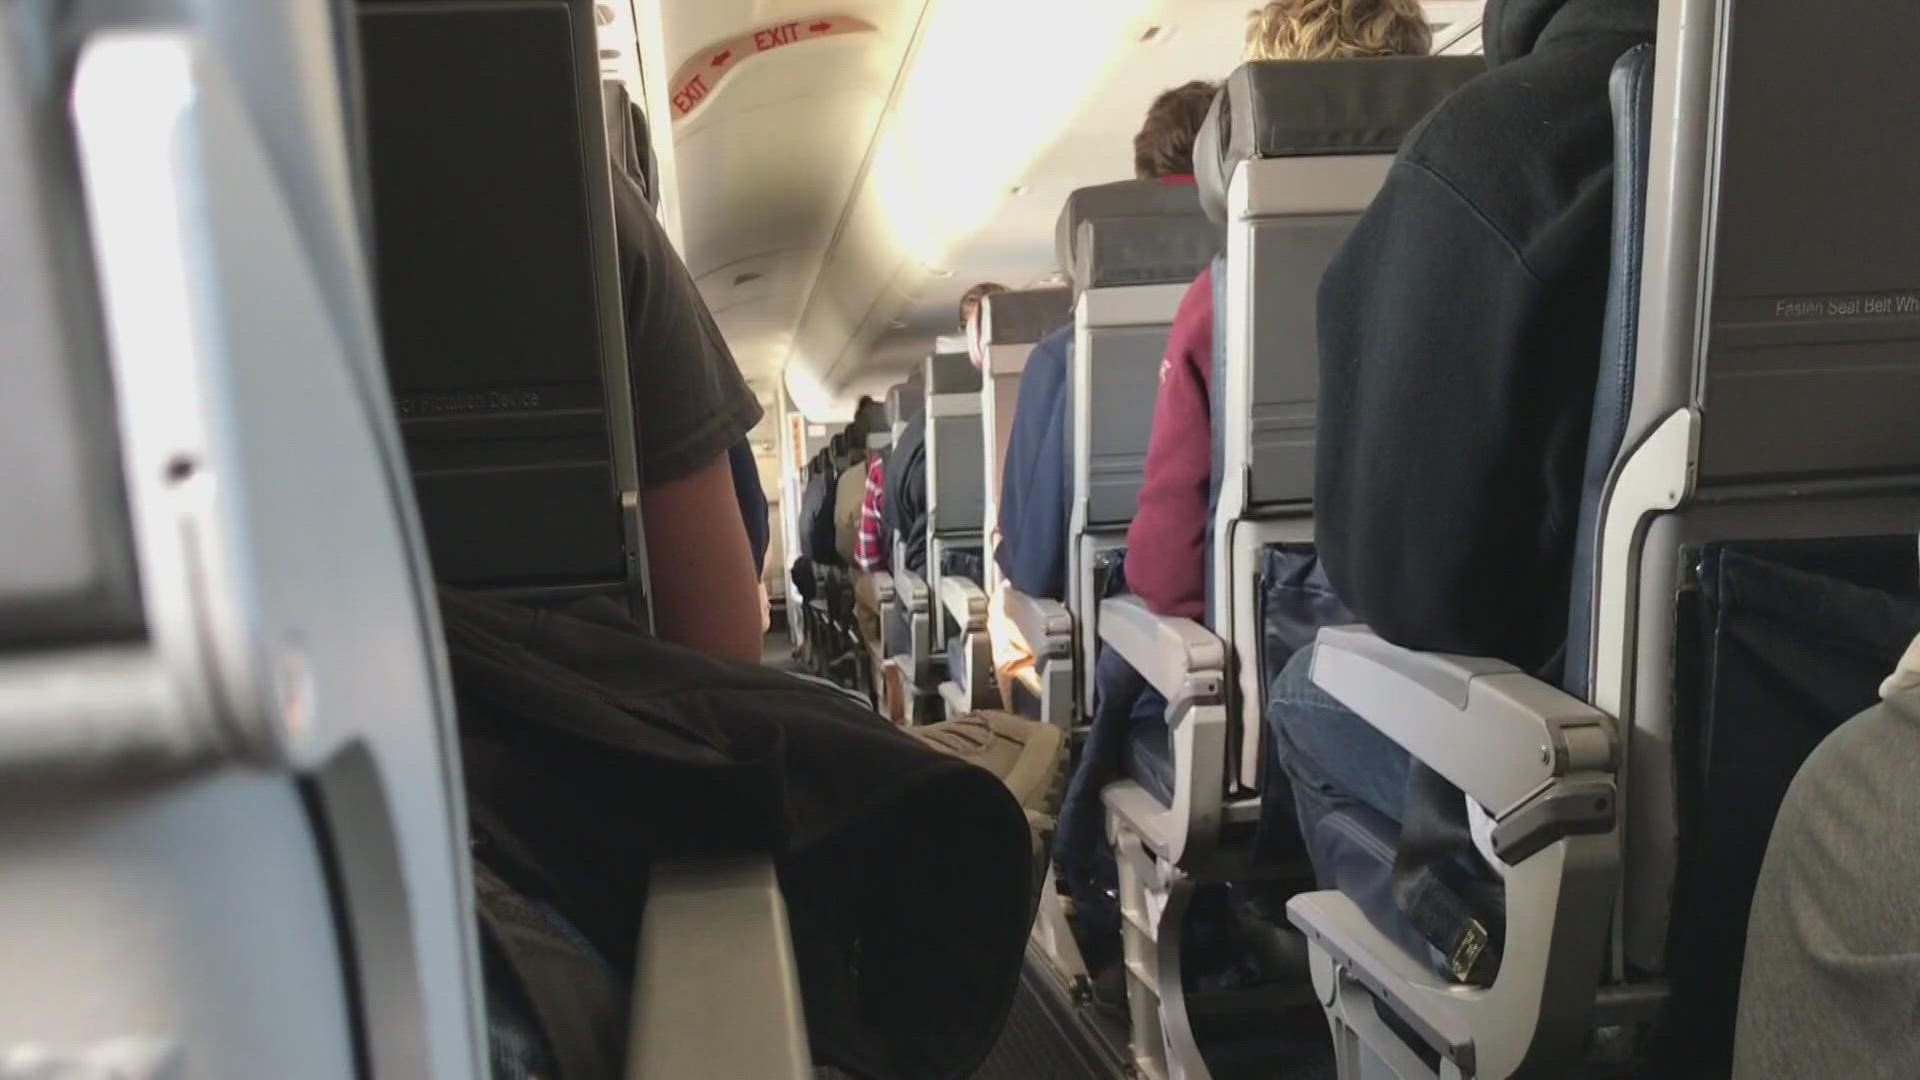 This week, the agency hopes to start the 90-day public comment period on the minimum seat dimensions necessary for airline passenger safety.